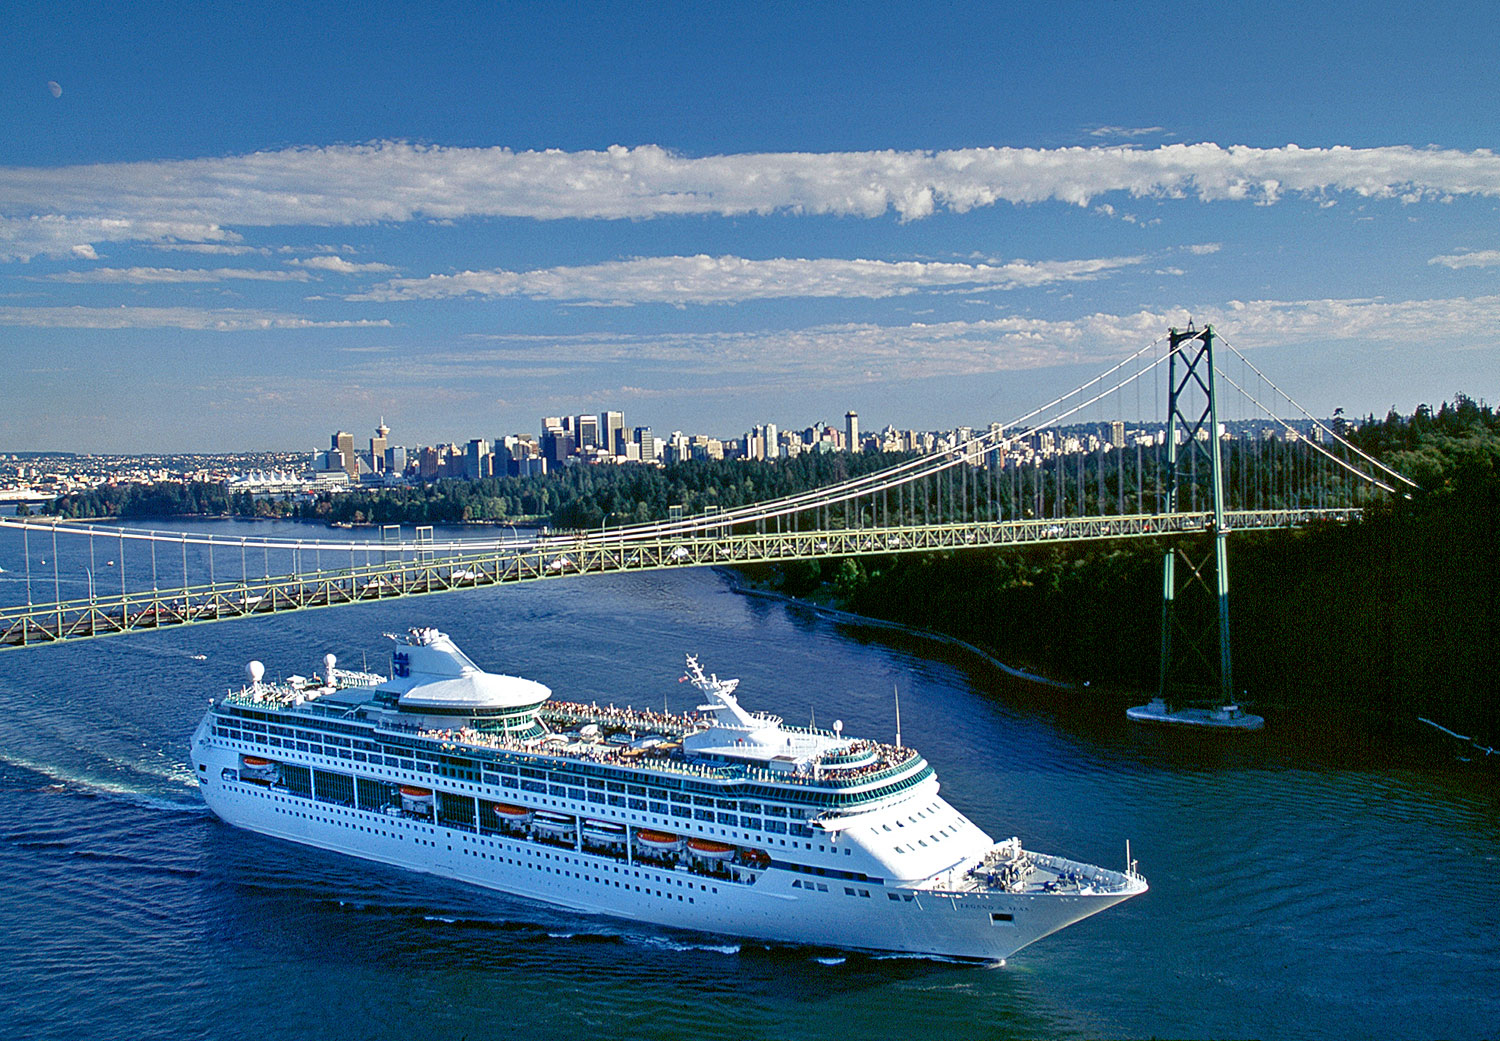 Aerial photo of Legend of the Seas departing Vancouver, BC